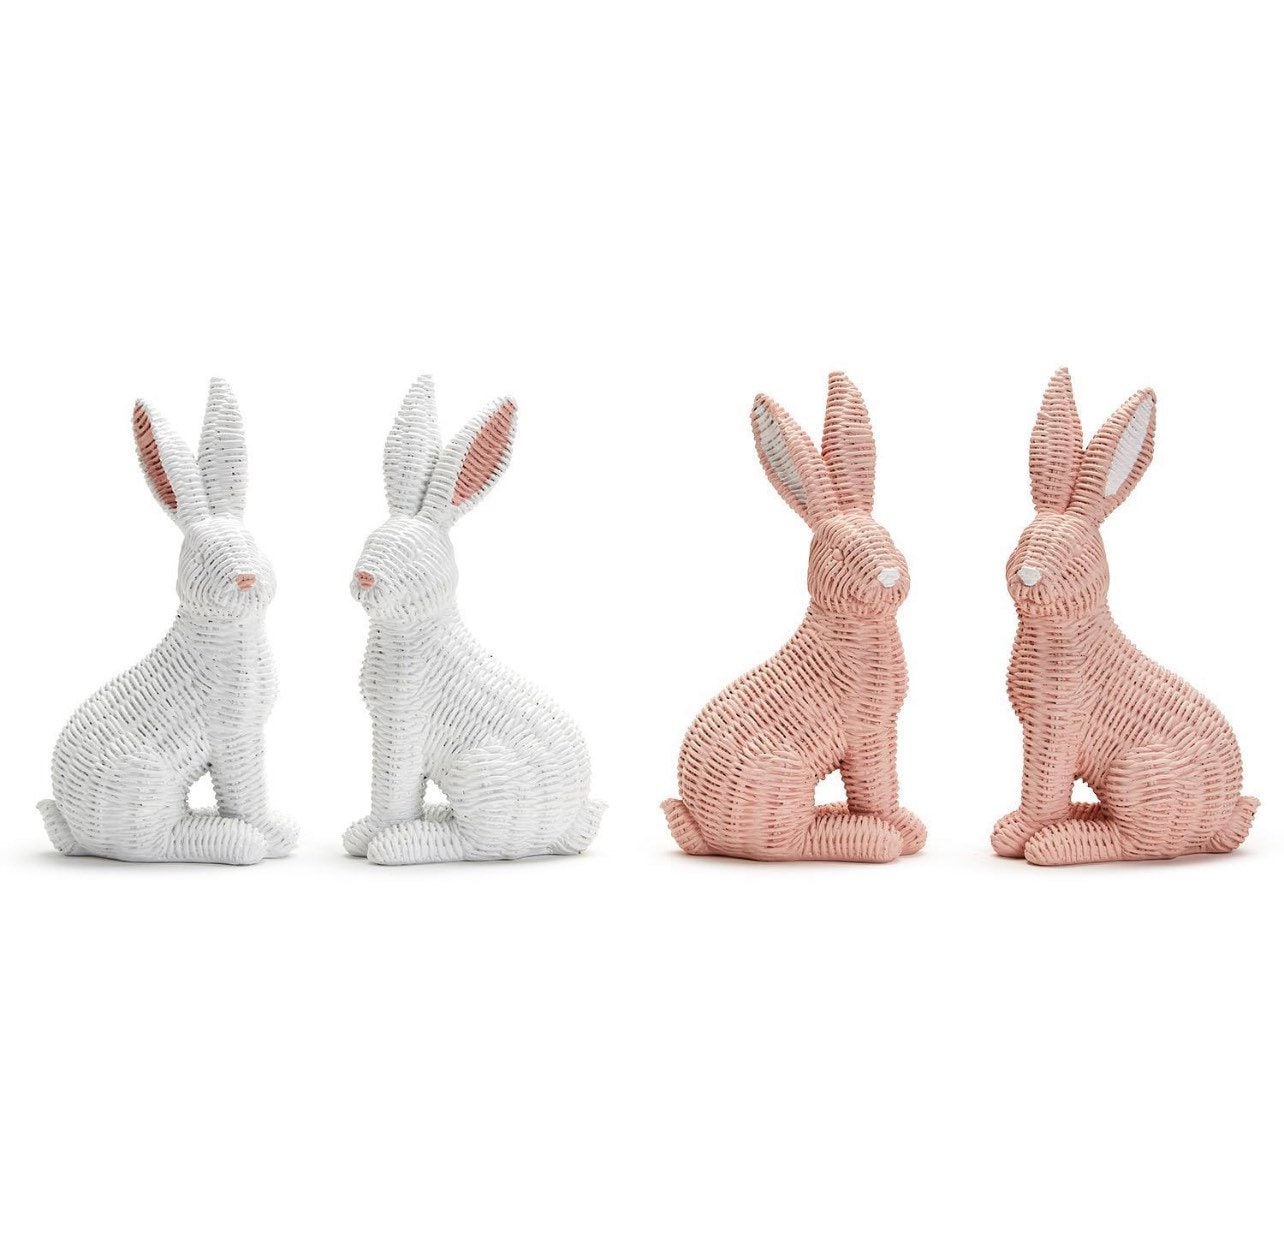 Wicker bunny figurine pair, choose pink or white